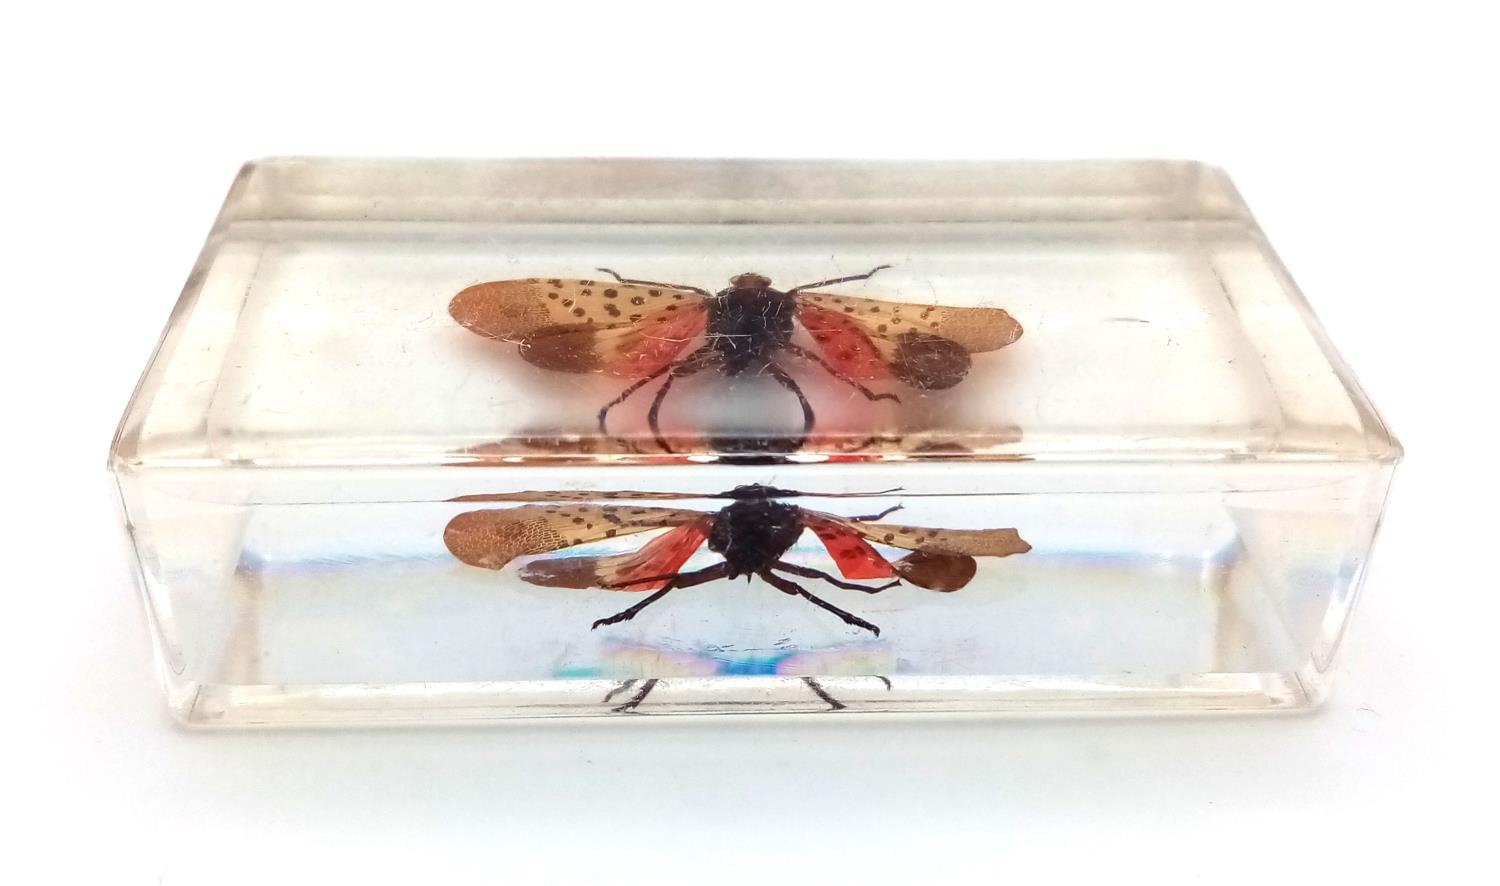 A Spotted Lanternfly in Clear Resin. 7cm x 4cm, 74.21g total weight. - Image 4 of 4